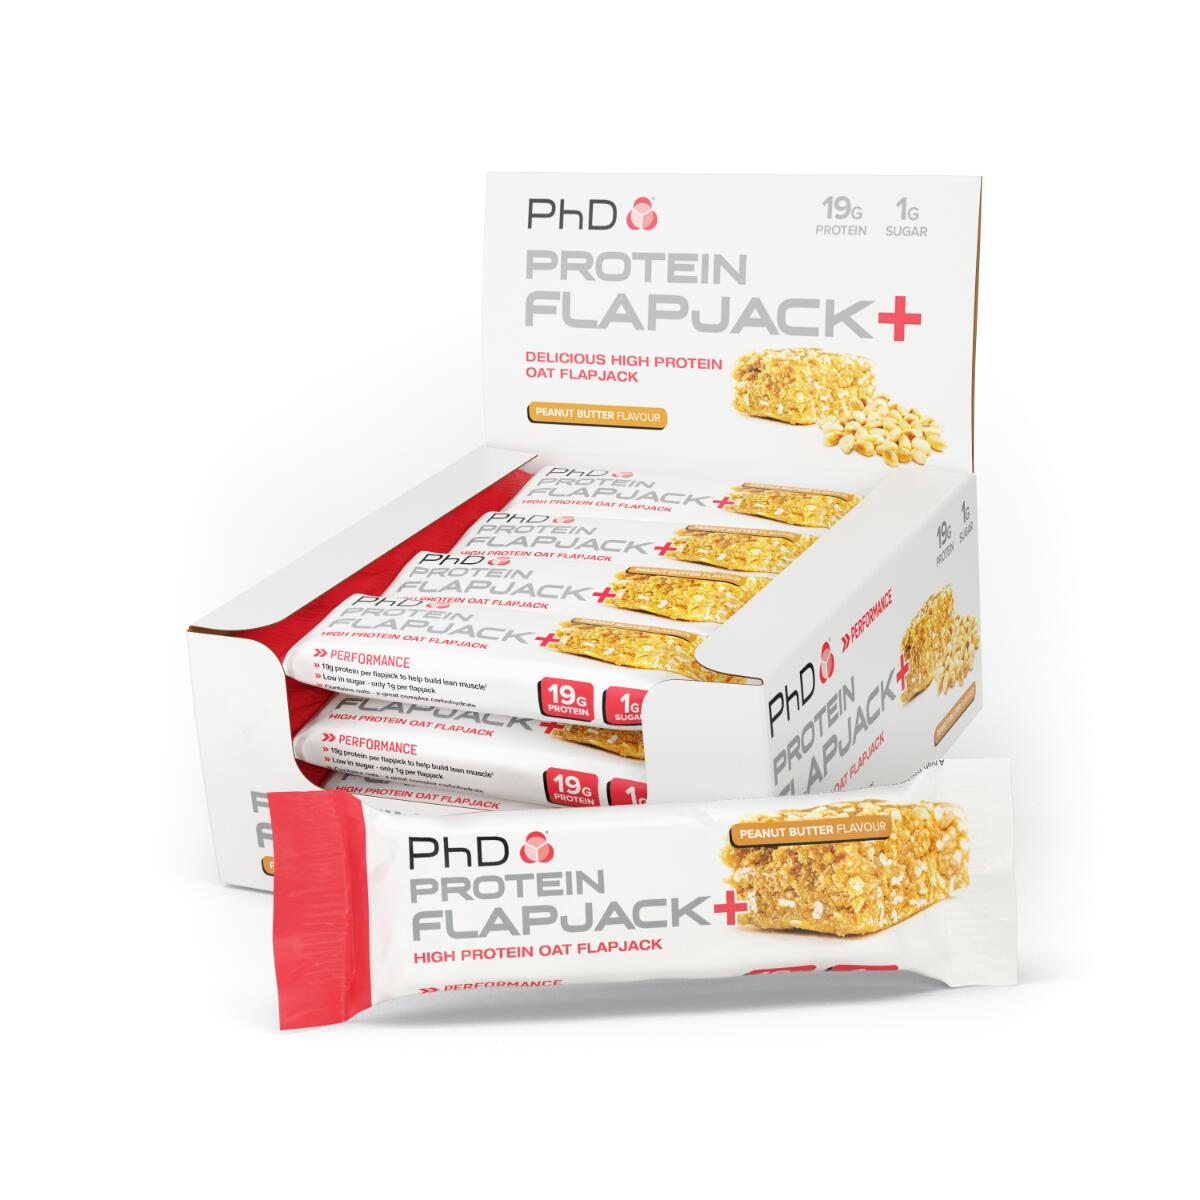 PHD NUTRITION PhD Nutrition | Flapjack+ Protein Bar | Peanut Butter Flavour | 12 pack